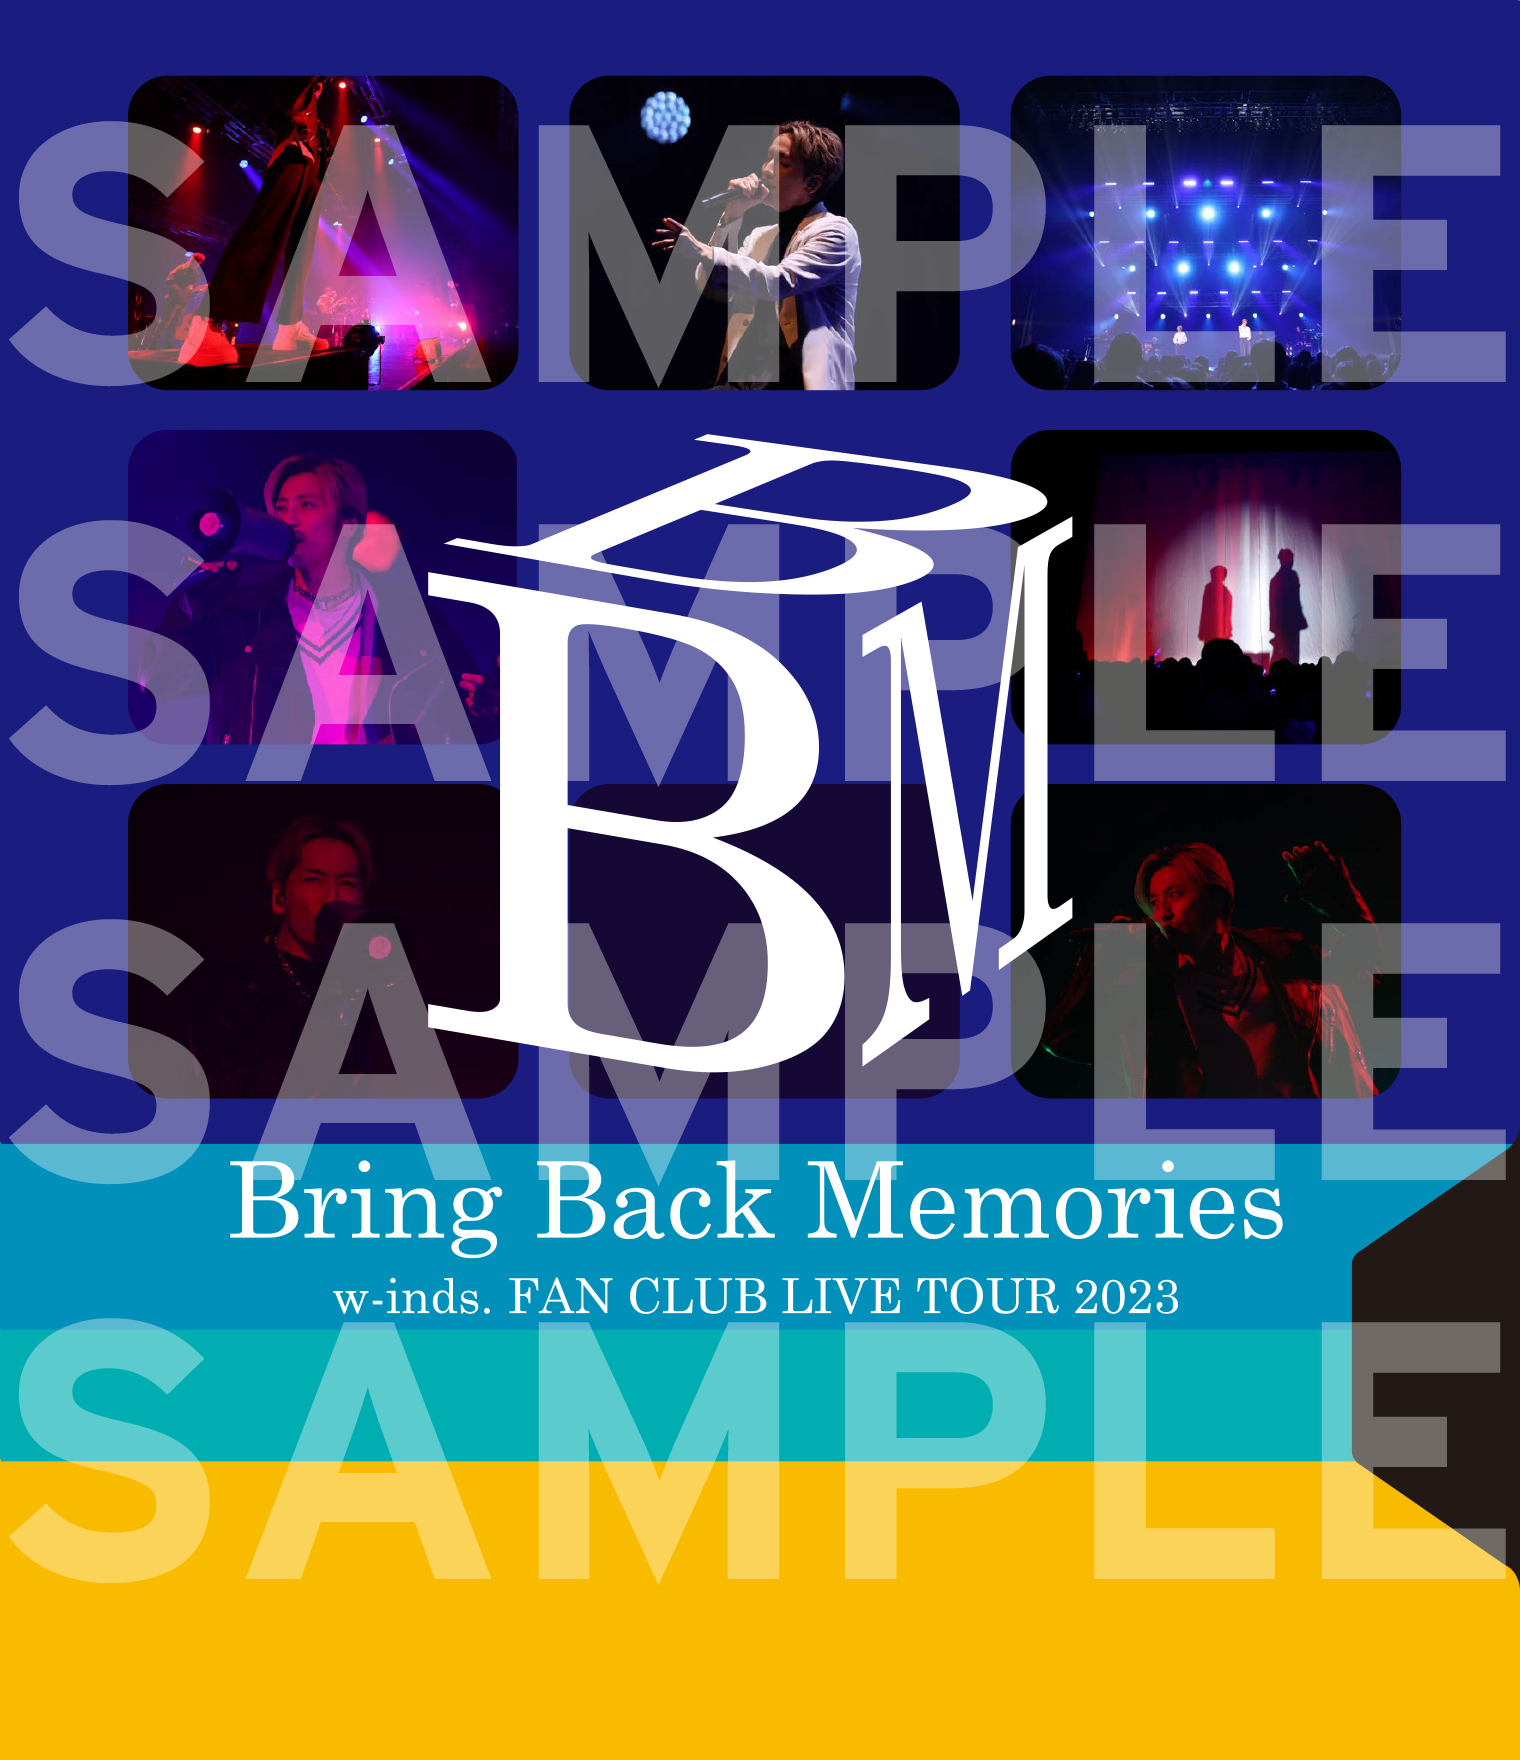 BACK TO THE MEMORIES Blu-ray-